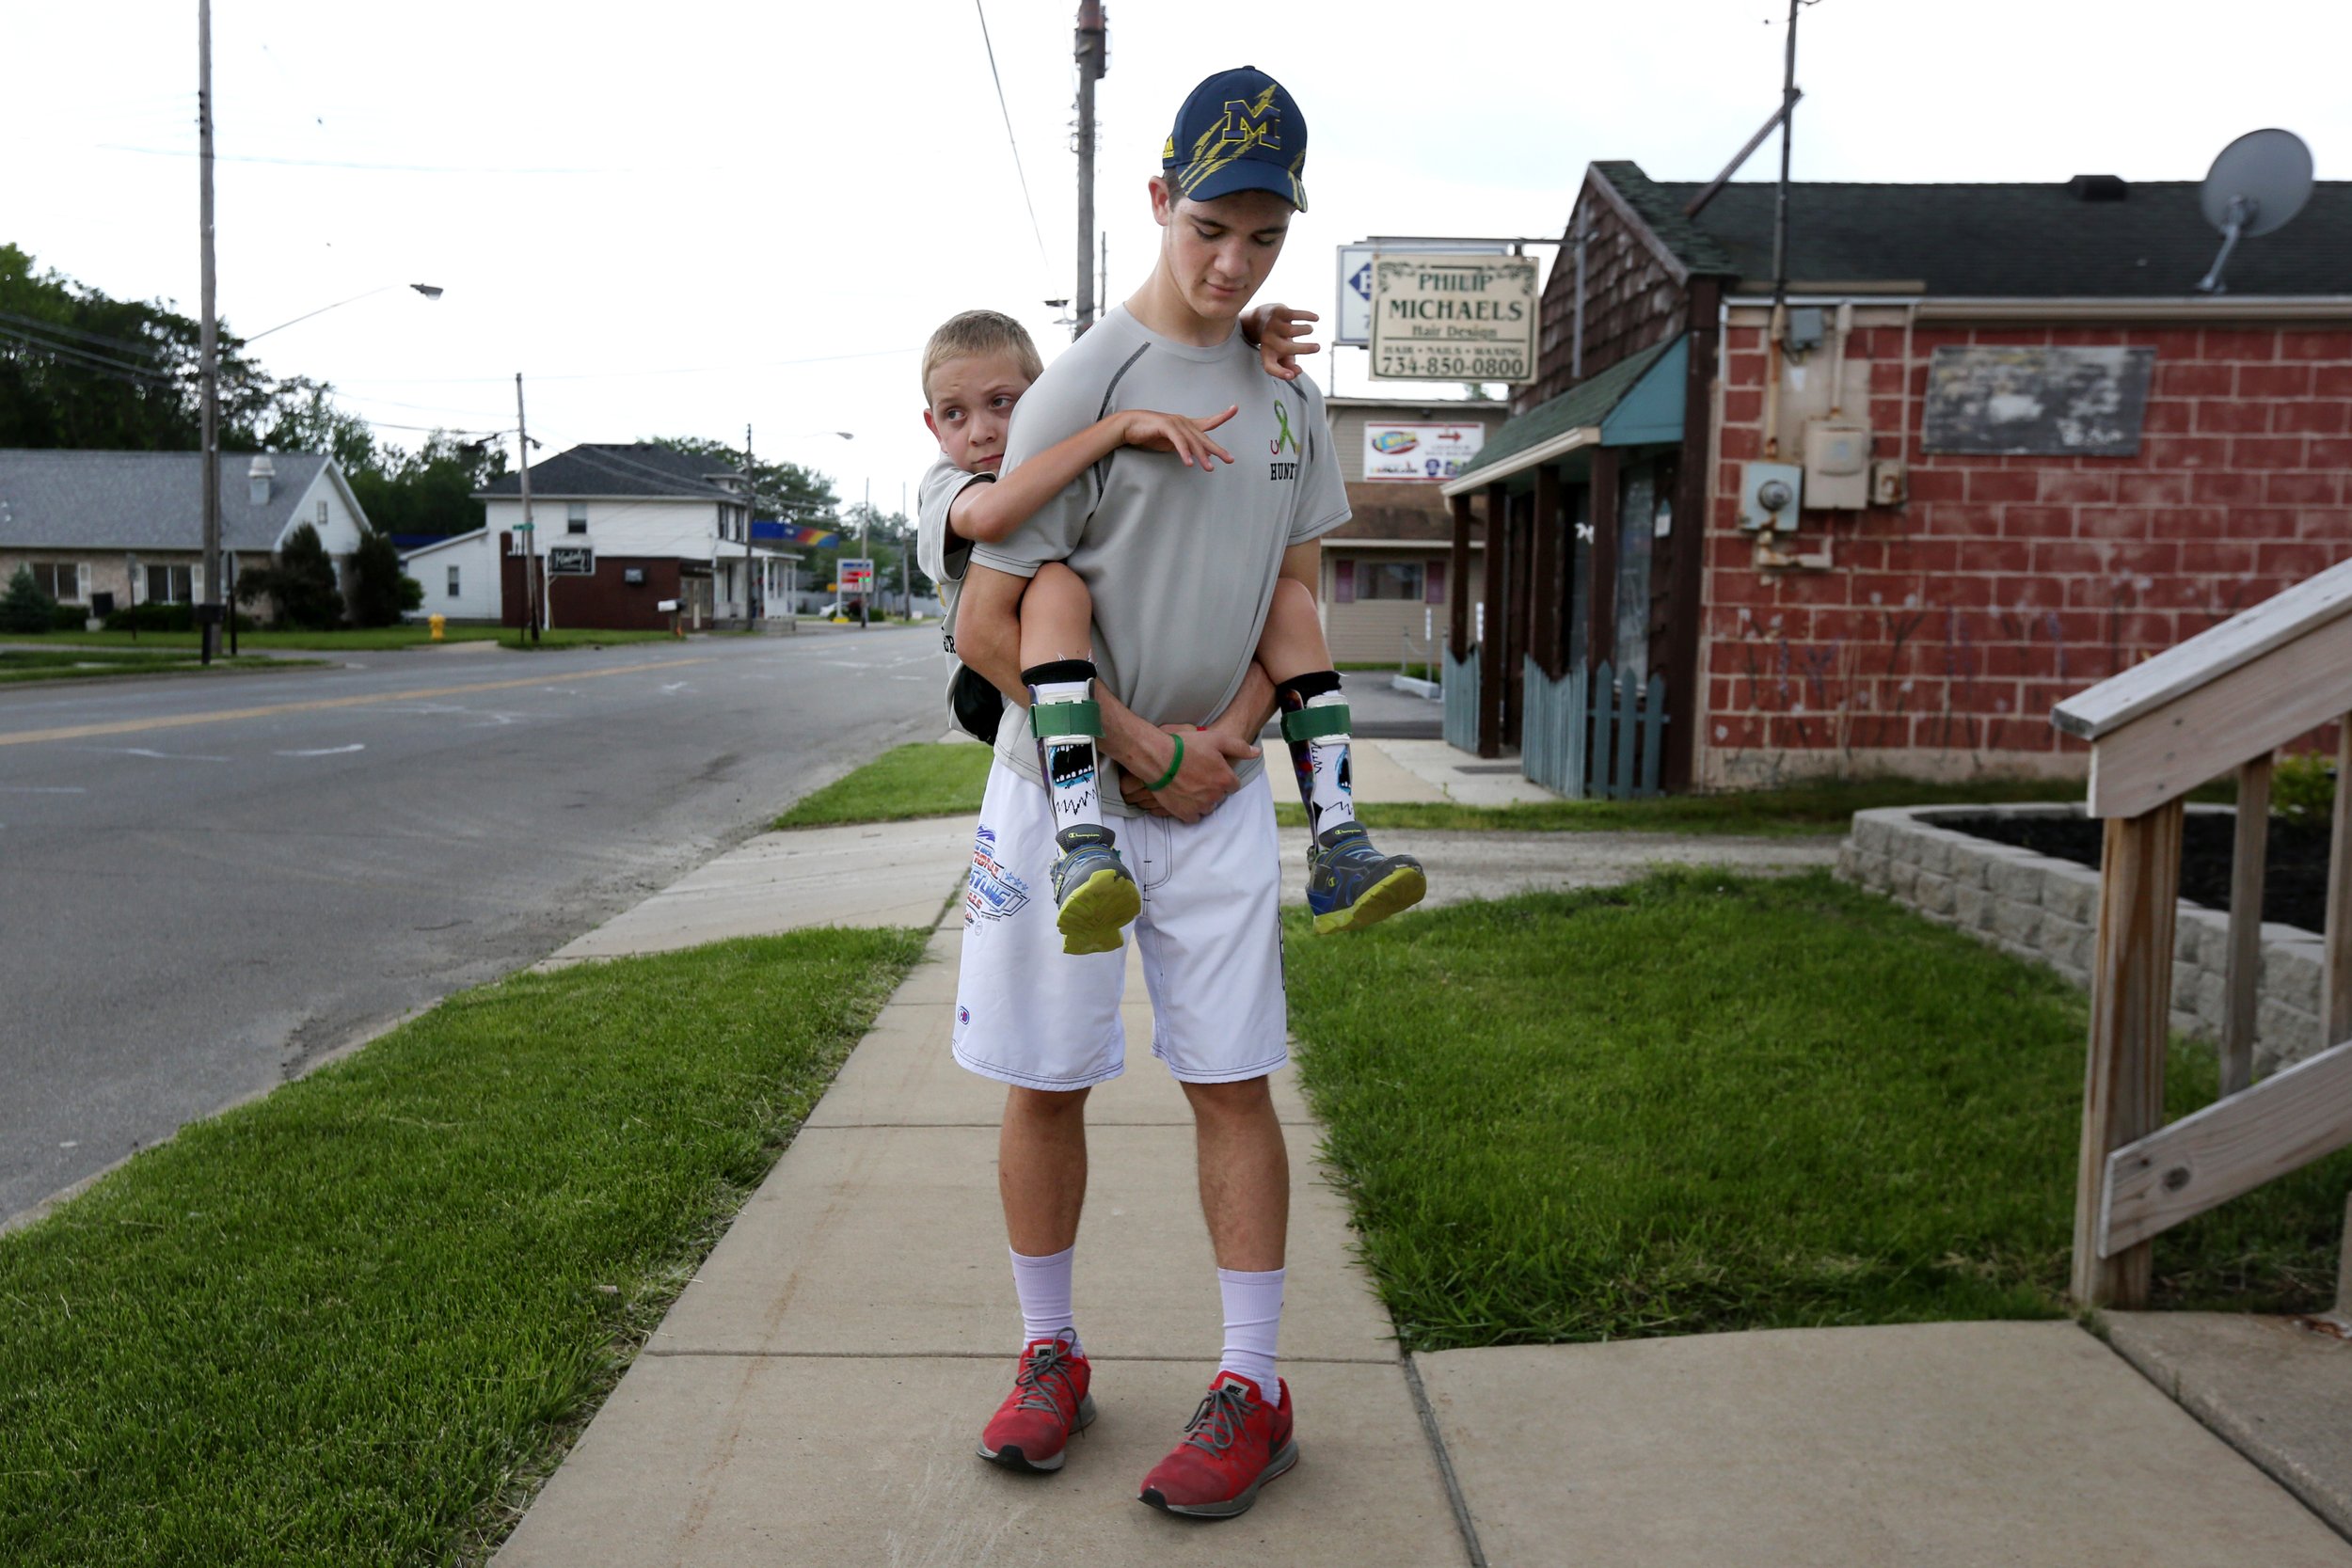  Hunter Gandee, 15, carries his brother Braden, 8, on his back for long walks to raise awareness of Cerebral Palsy, which Braden has, and promote, "a truly accessibly world." The brothers were walking through Temperance, Mich., on May 30, 2015, to di